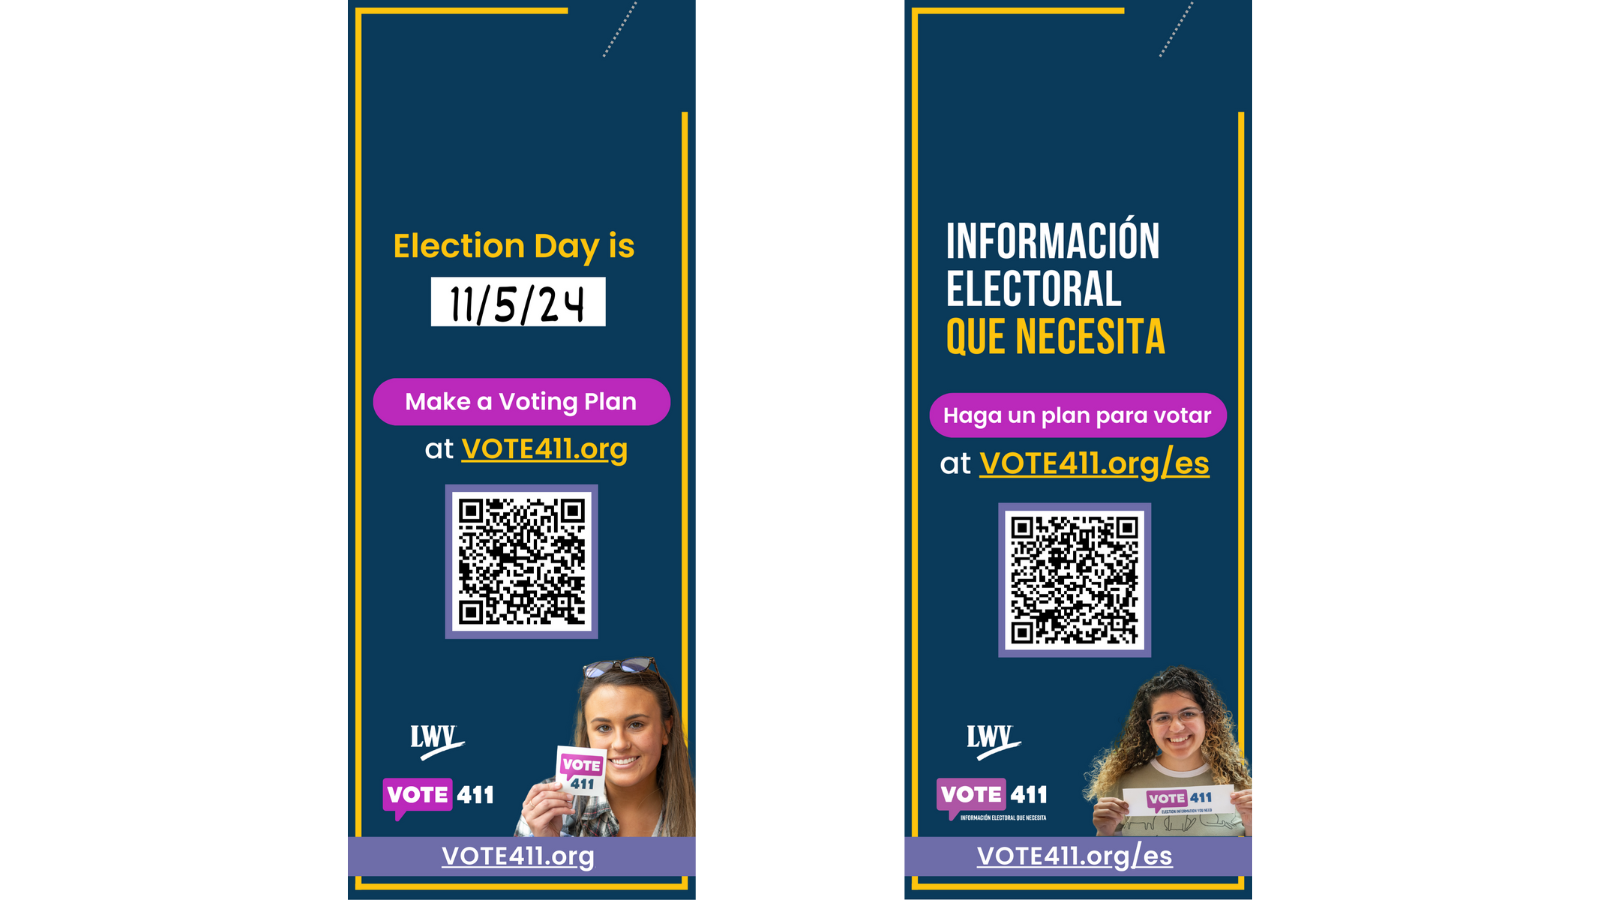 There are two door hangers featured side by side. Both door hangers have a navy blue background and a yellow border, QR codes to VOTE411 and a purple stripe at the bottom that has links to VOTE411.org or VOTE411.org/es. The door hanger on the left is in English, with text at the top that says "Election Day is" with a white box underneath. The white box has a handwritten date inside. Under the white box is a pink button that says "Make a voting plan" and text underneath that says "at VOTE411.org" and a QR code to the website. There is an image of a young woman holding a VOTE411 sticker in the bottom right corner. In the bottom left corner are the LWV and VOTE411 logos.  The door hanger on the right is in Spanish and says "Informacion electoral que necesita" at the top. Underneath is a pink button that says "Haga un plan para votar" and underneath the button is text that says "at VOTE411.org/es" and a QR to the website. In the bottom right corner is a photo of a young woman holding a VOTE411 sticker. In the bottom left corner are the LWV and Spanish VOTE411 logos.